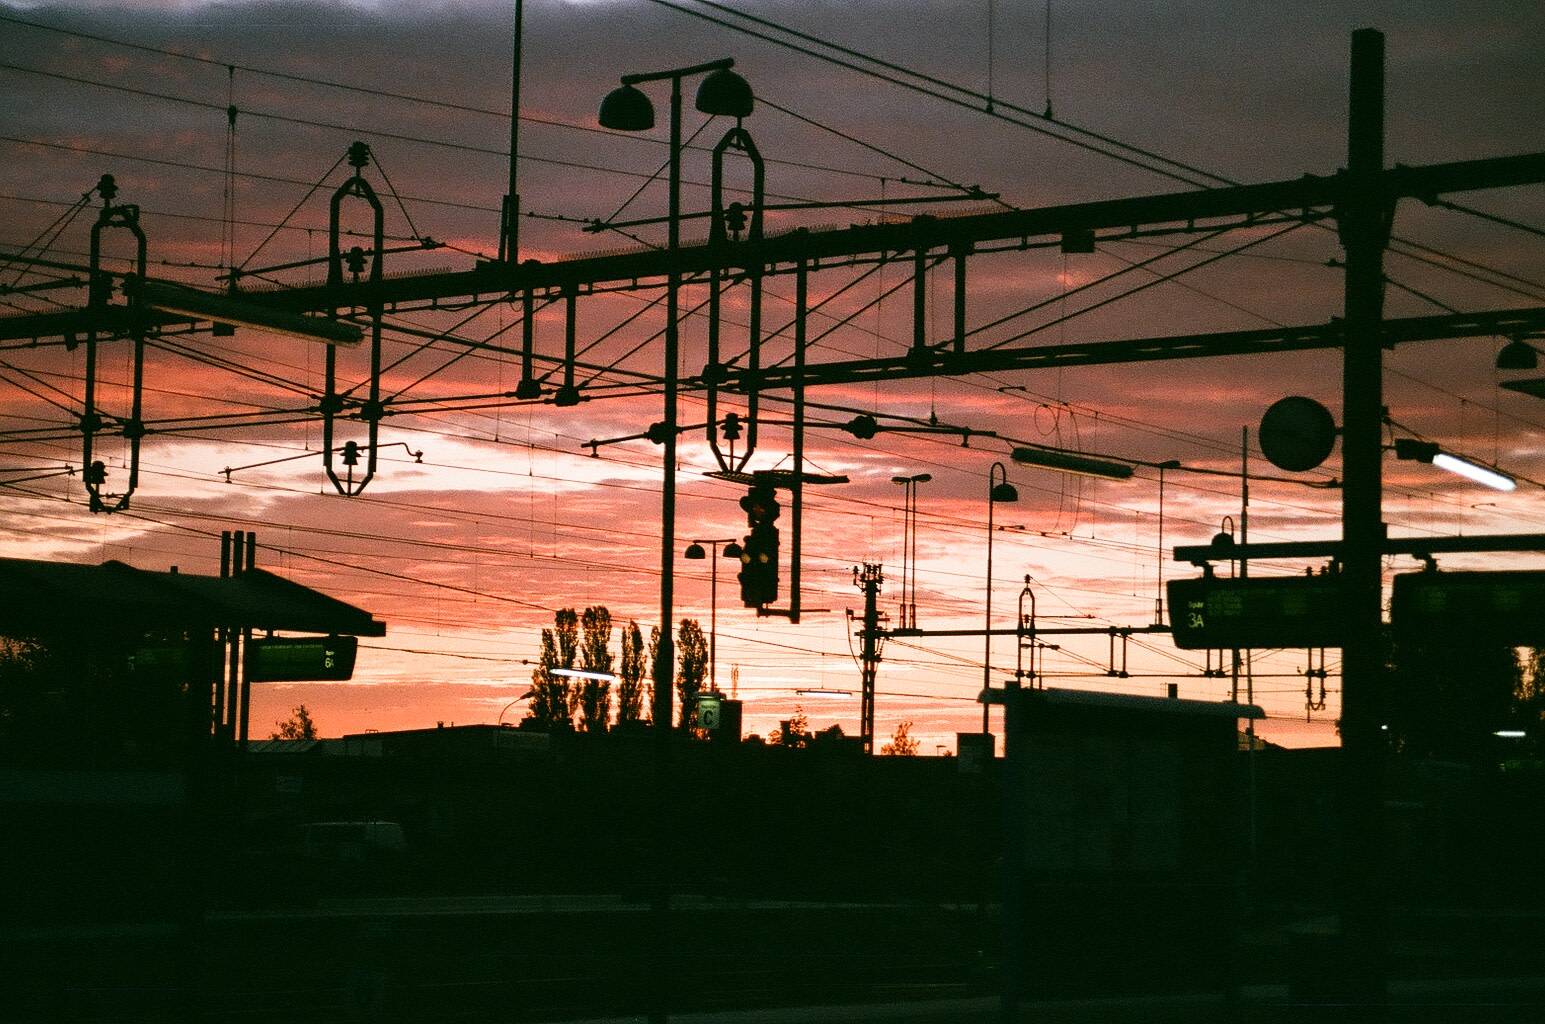 cloudy red sky visible through the electrical poles and wires of the train station